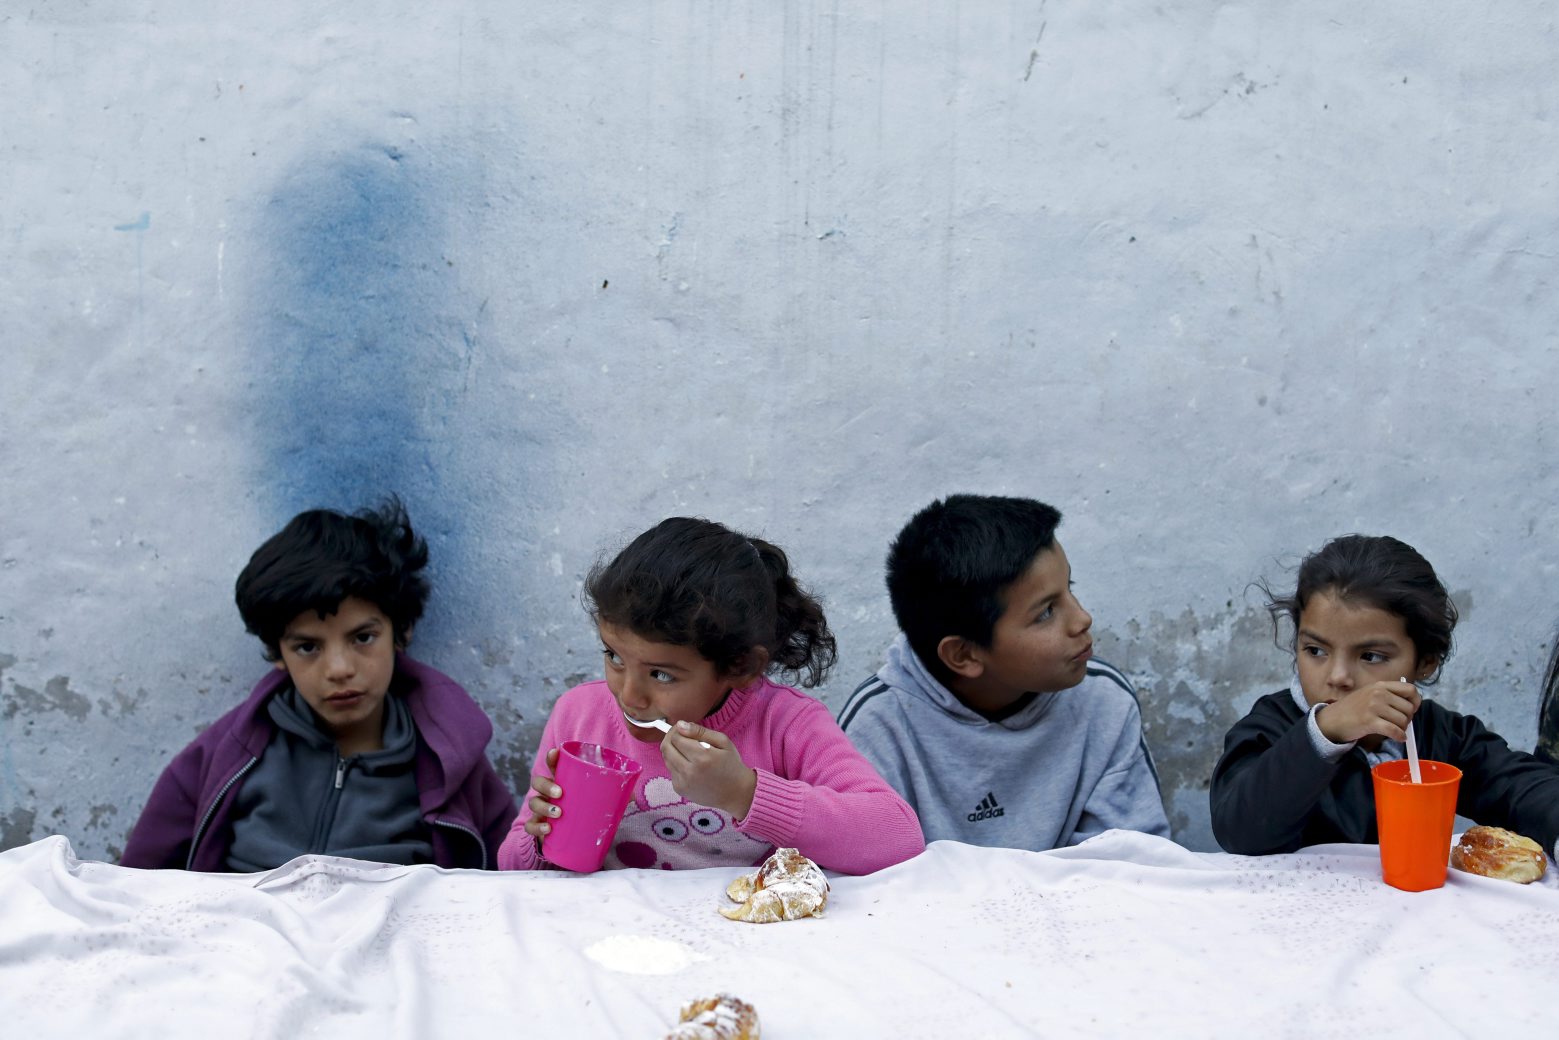 Children eat at a soup kitchen on the outskirts of Buenos Aires, Argentina, Tuesday, Sept. 17, 2019. Lawmakers passed a food emergency bill aimed to boost soup kitchens around the country amid food price hikes. (AP Photo/Natacha Pisarenko) Week That Was from Latin America Photo Gallery